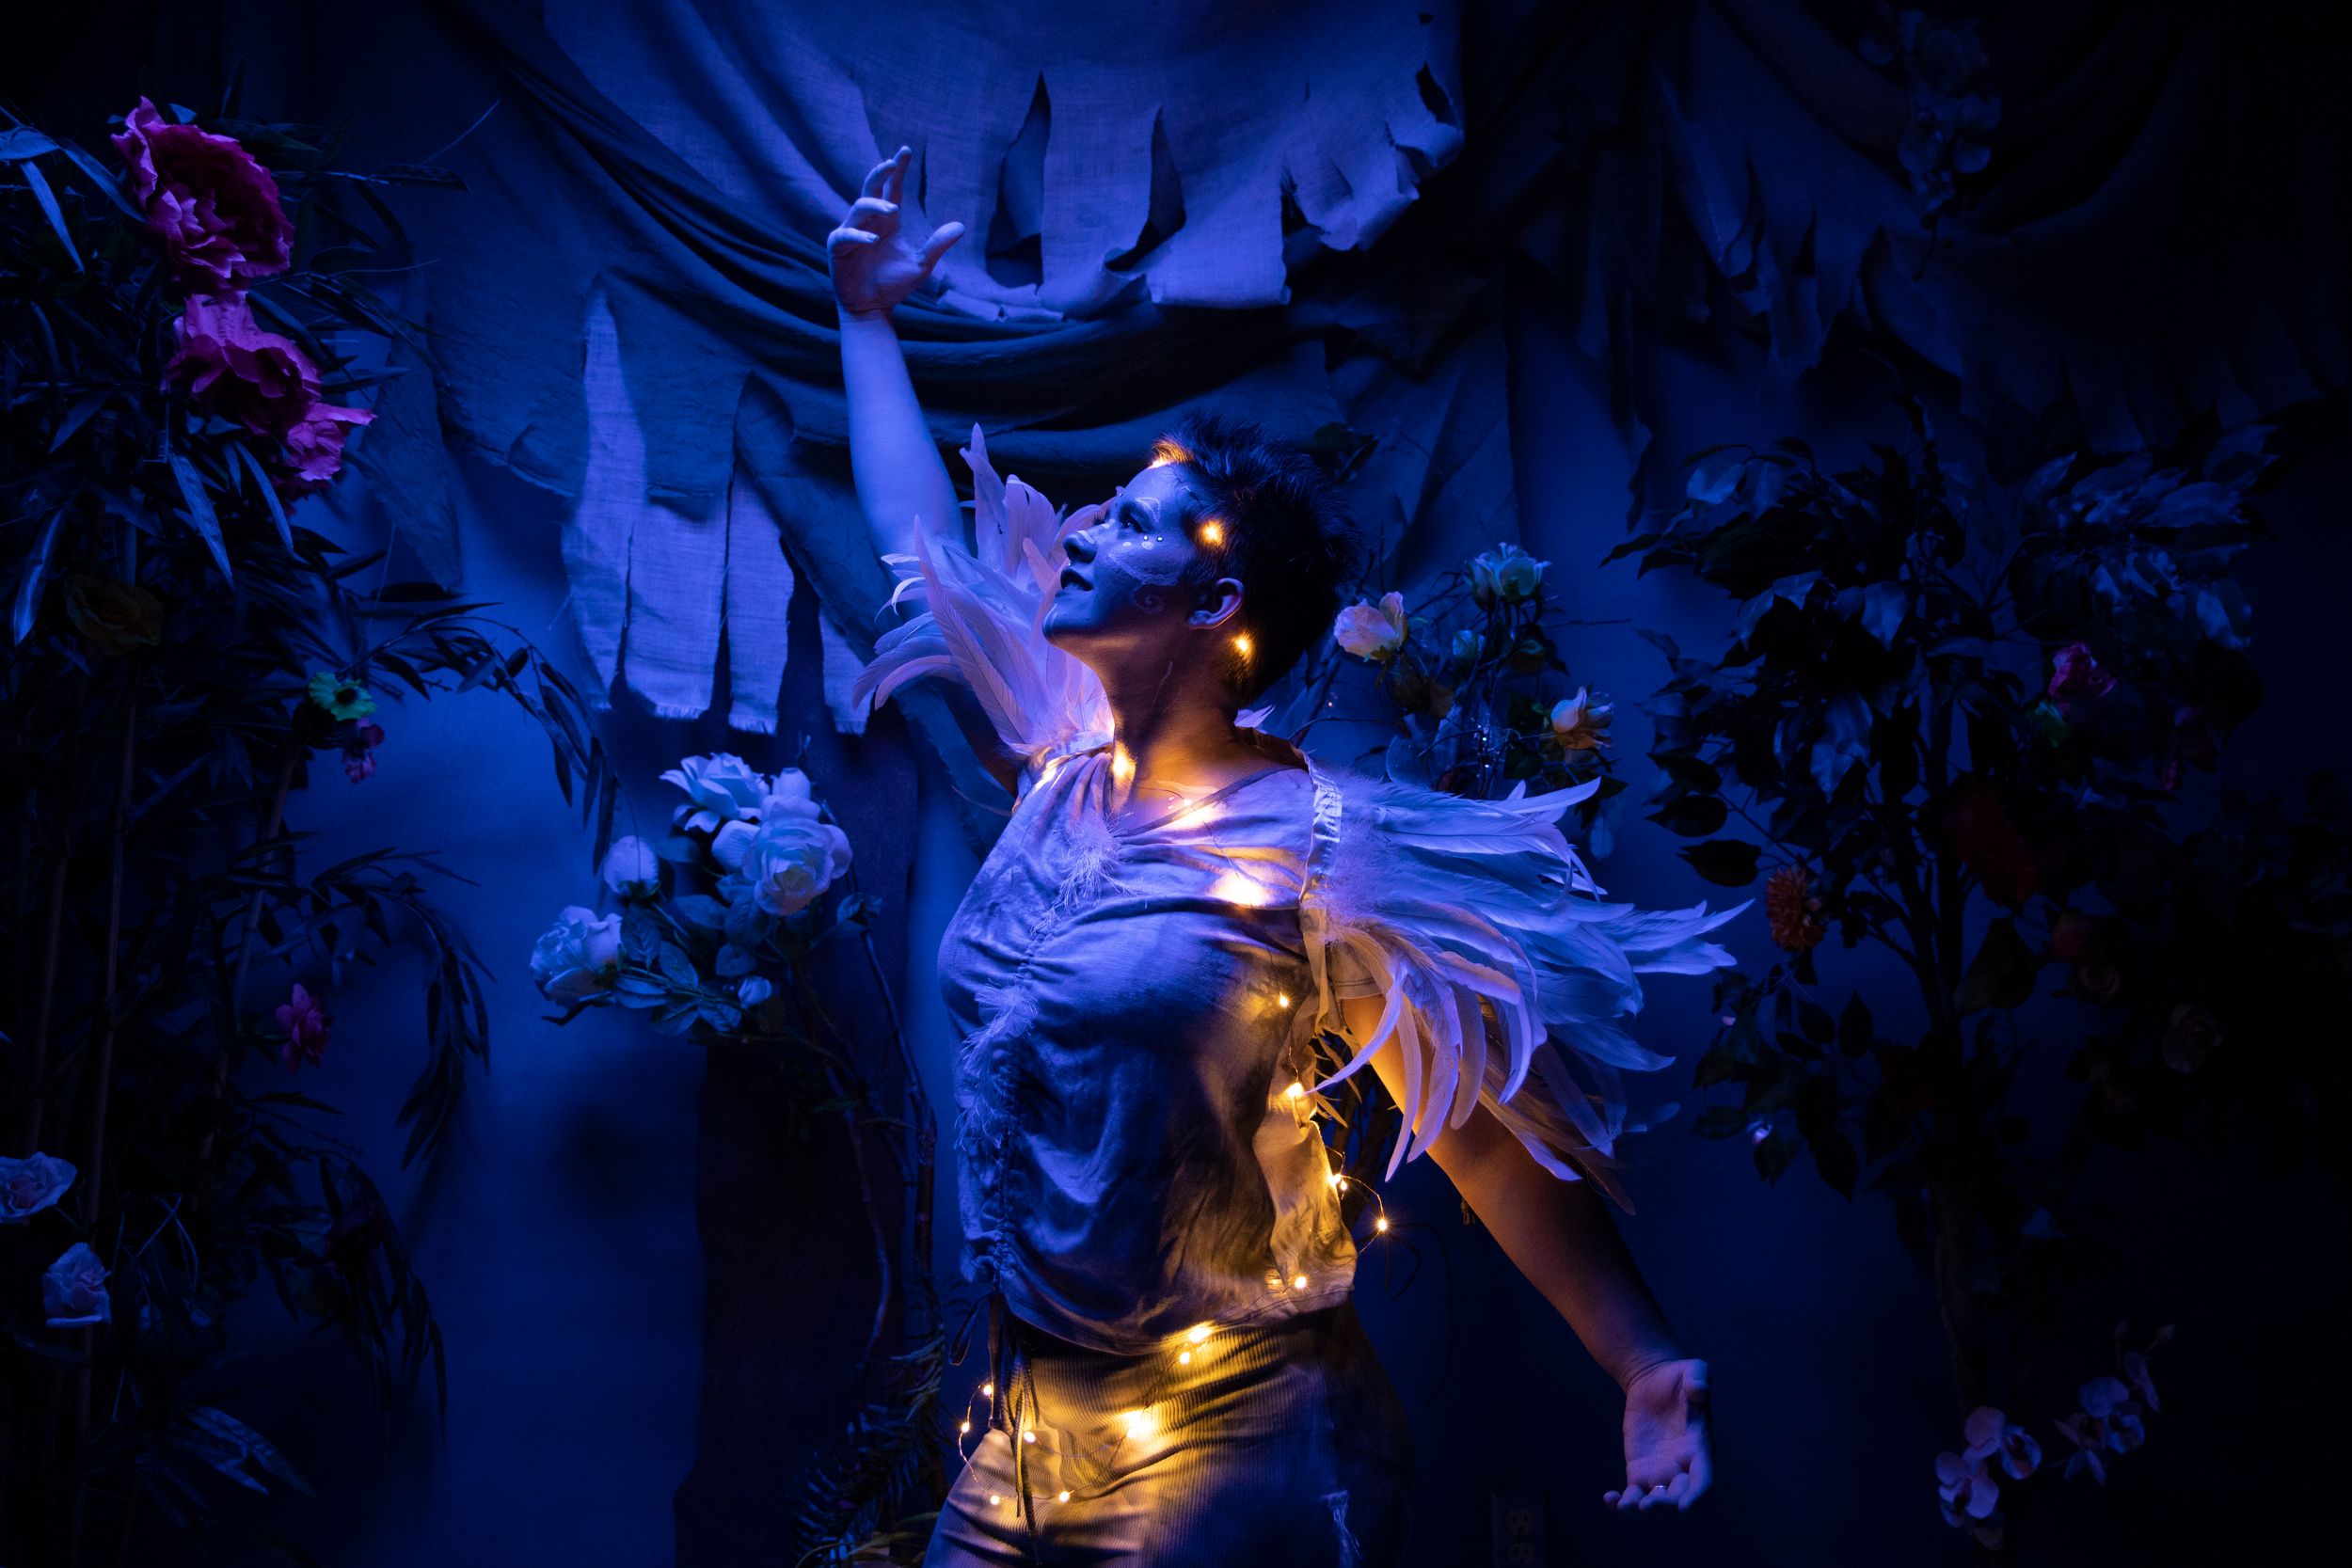 A student performing in Midsummer Night's Dream wearing a feathery costume and string lights.